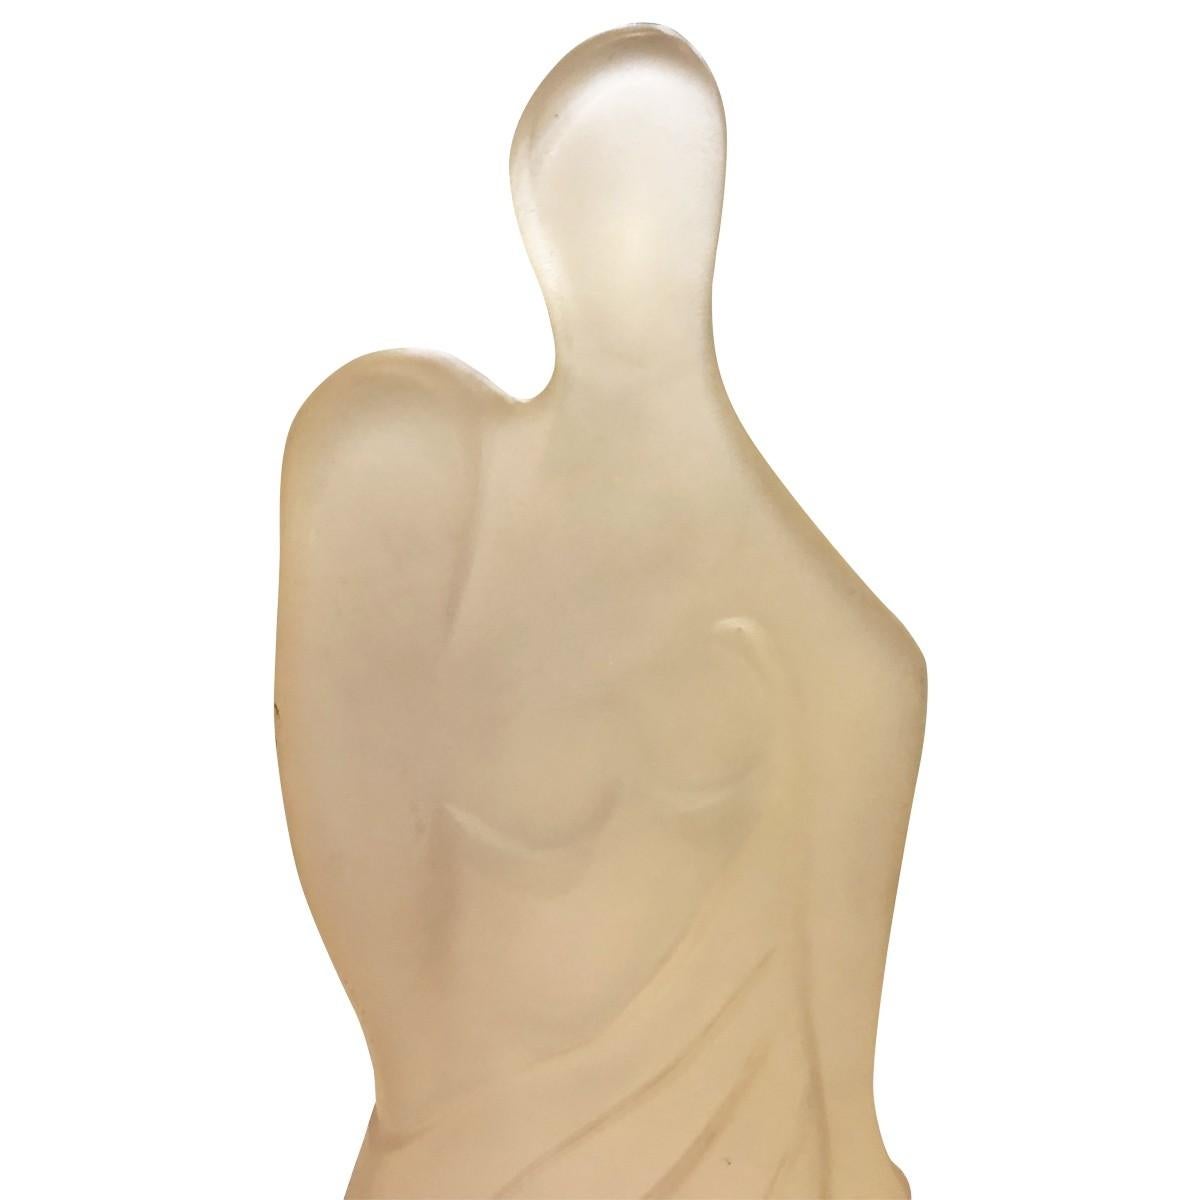 This elegant sculpture will undoubtedly upgrade any space. Made from translucent resin, it features a mother and child. Comes with a black wood painted base.

Dimensions
Width 8.50